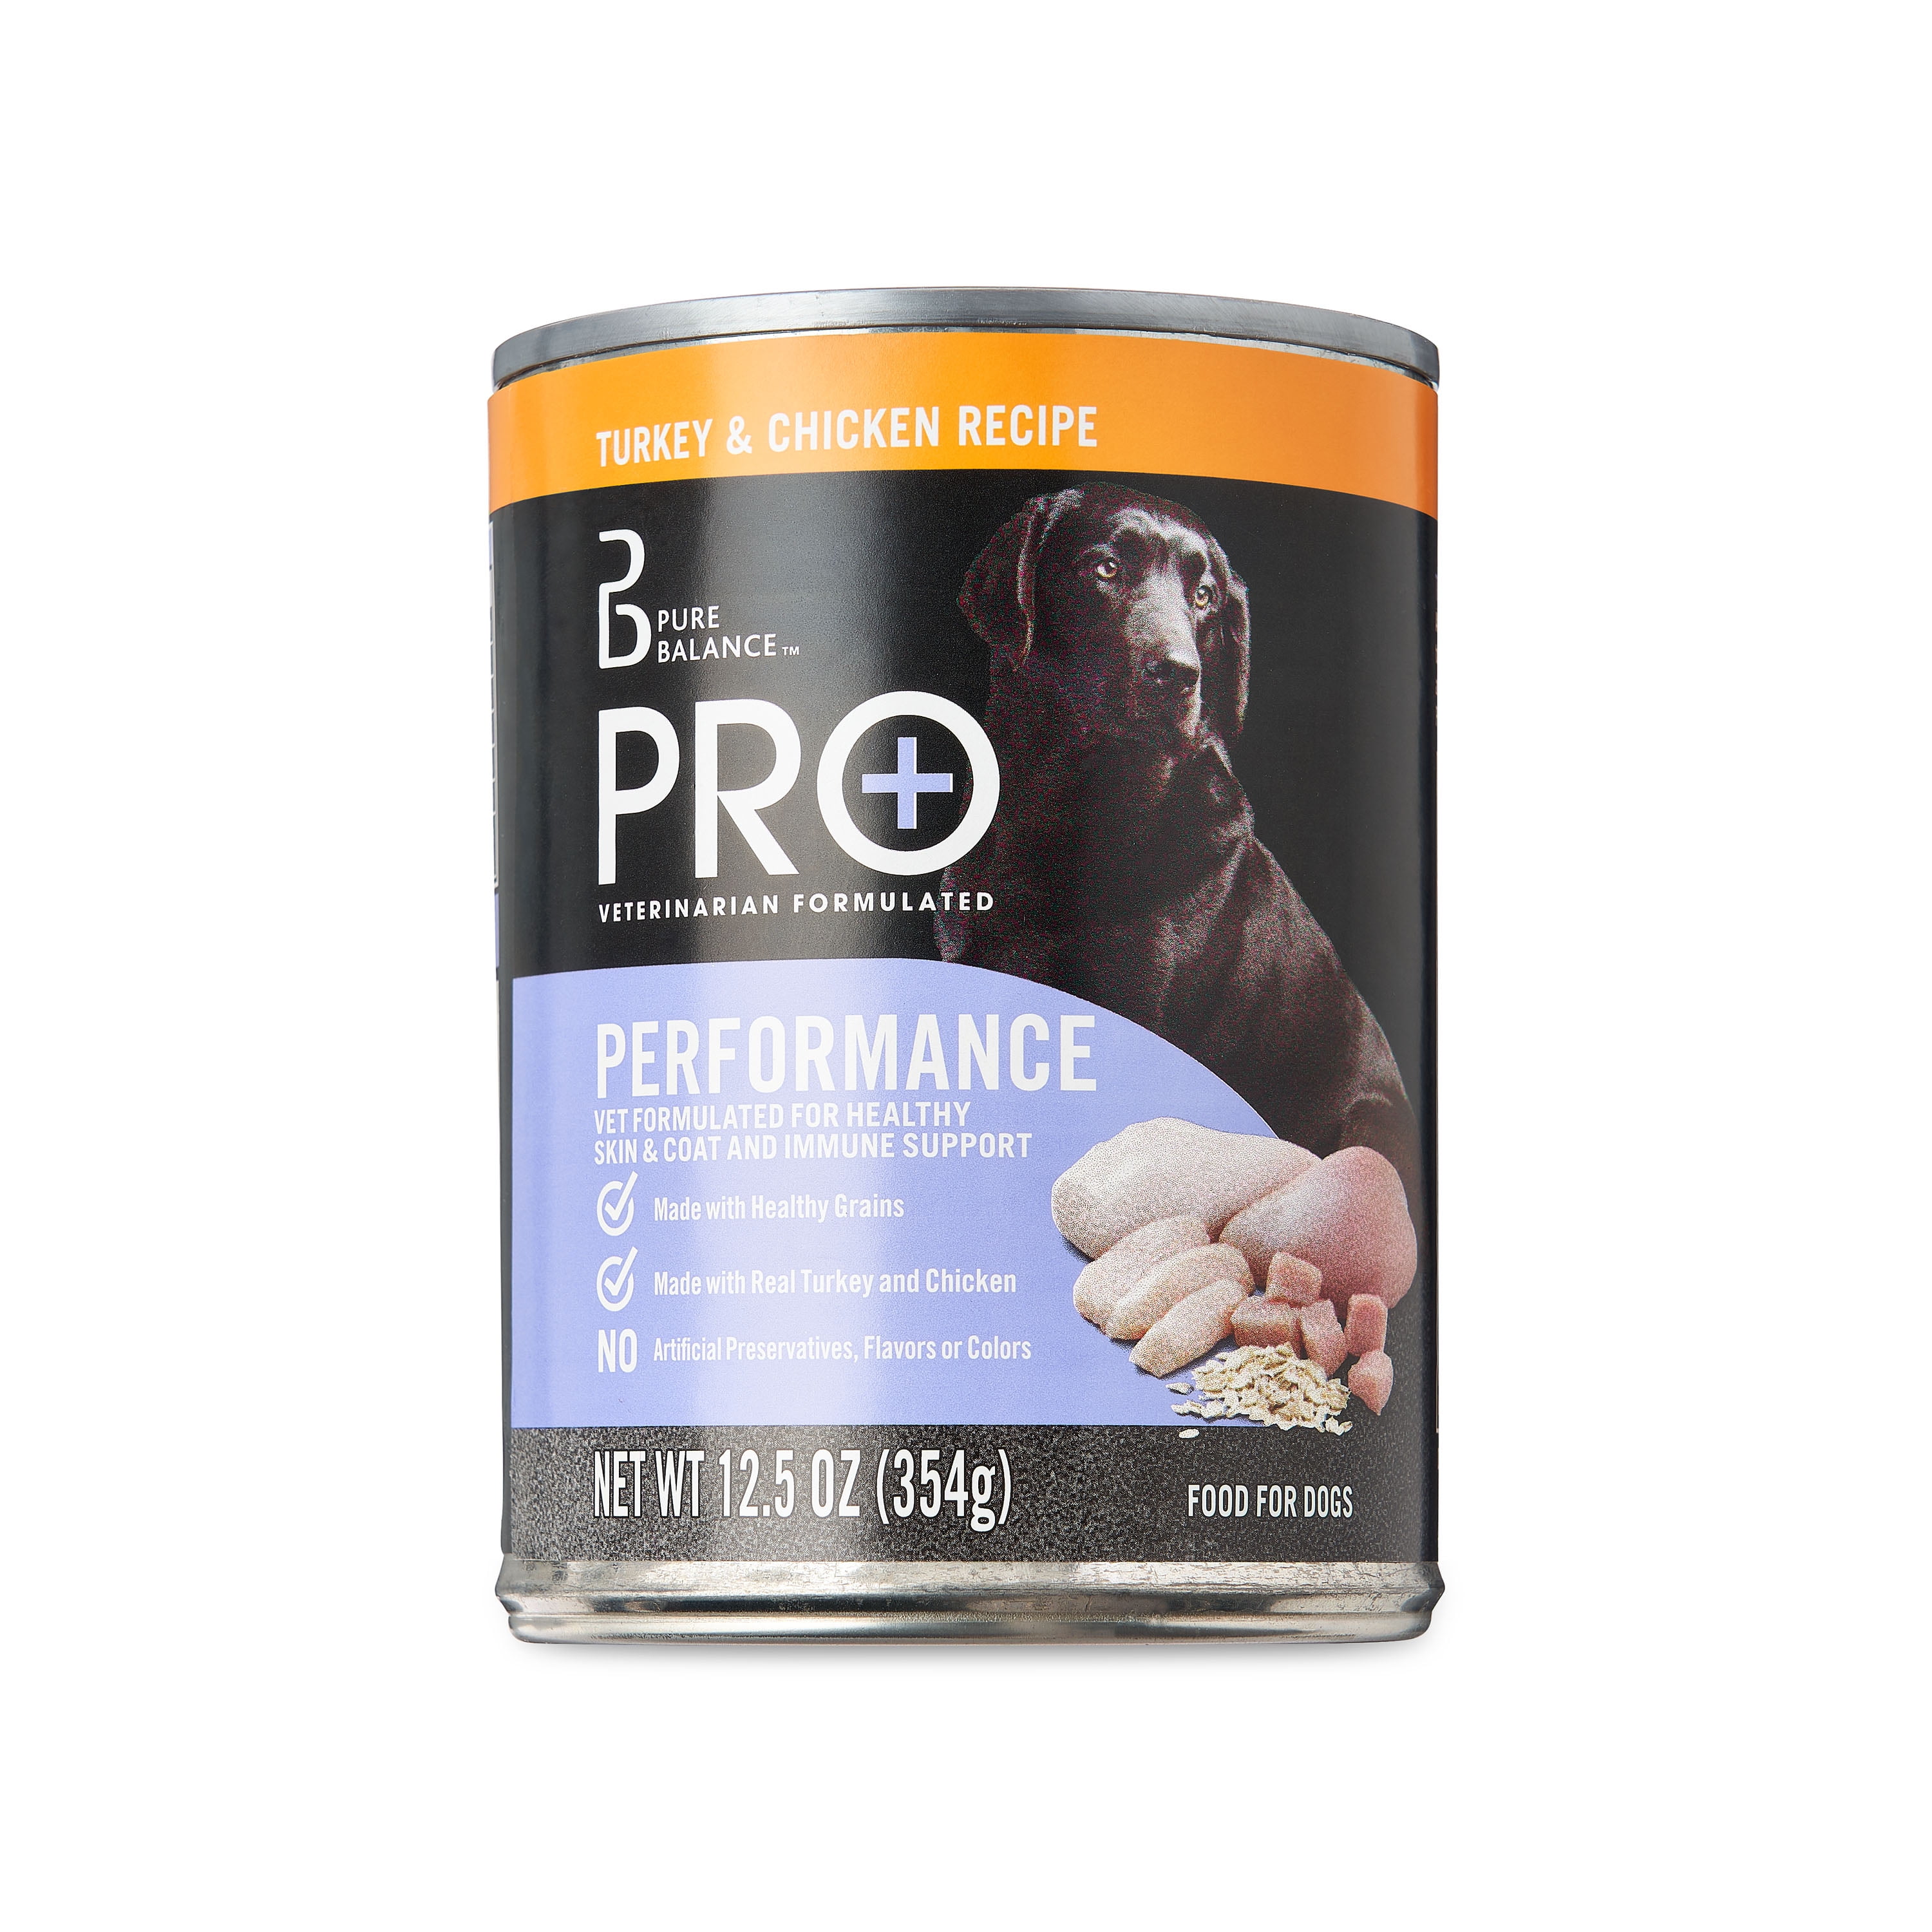 Pure Balance Pro+ Performance Wet Food for Dogs, Turkey & Chicken Recipe, 12.5 oz